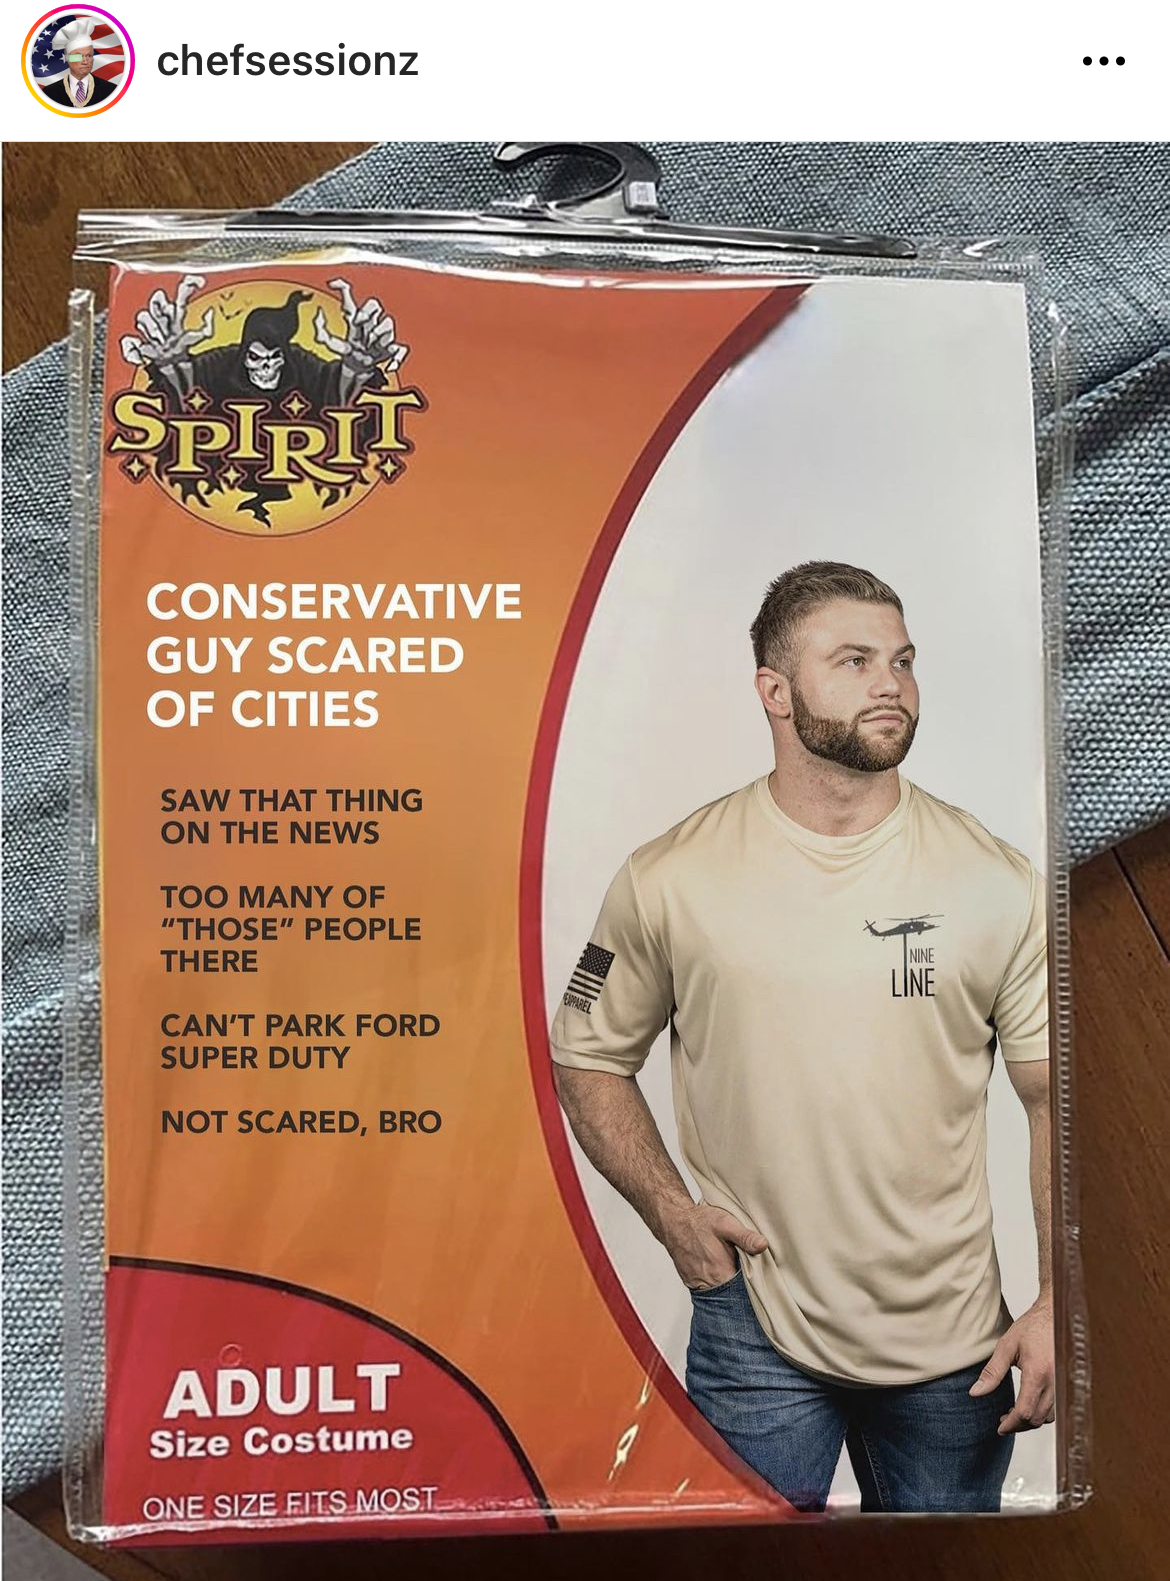 Costume Memes - spirit halloween - chefsessionz Spirit Conservative Guy Scared Of Cities Saw That Thing On The News Too Many Of "Those" People There Can'T Park Ford Super Duty Not Scared, Bro Adult Size Costume One Size Fits Most Line